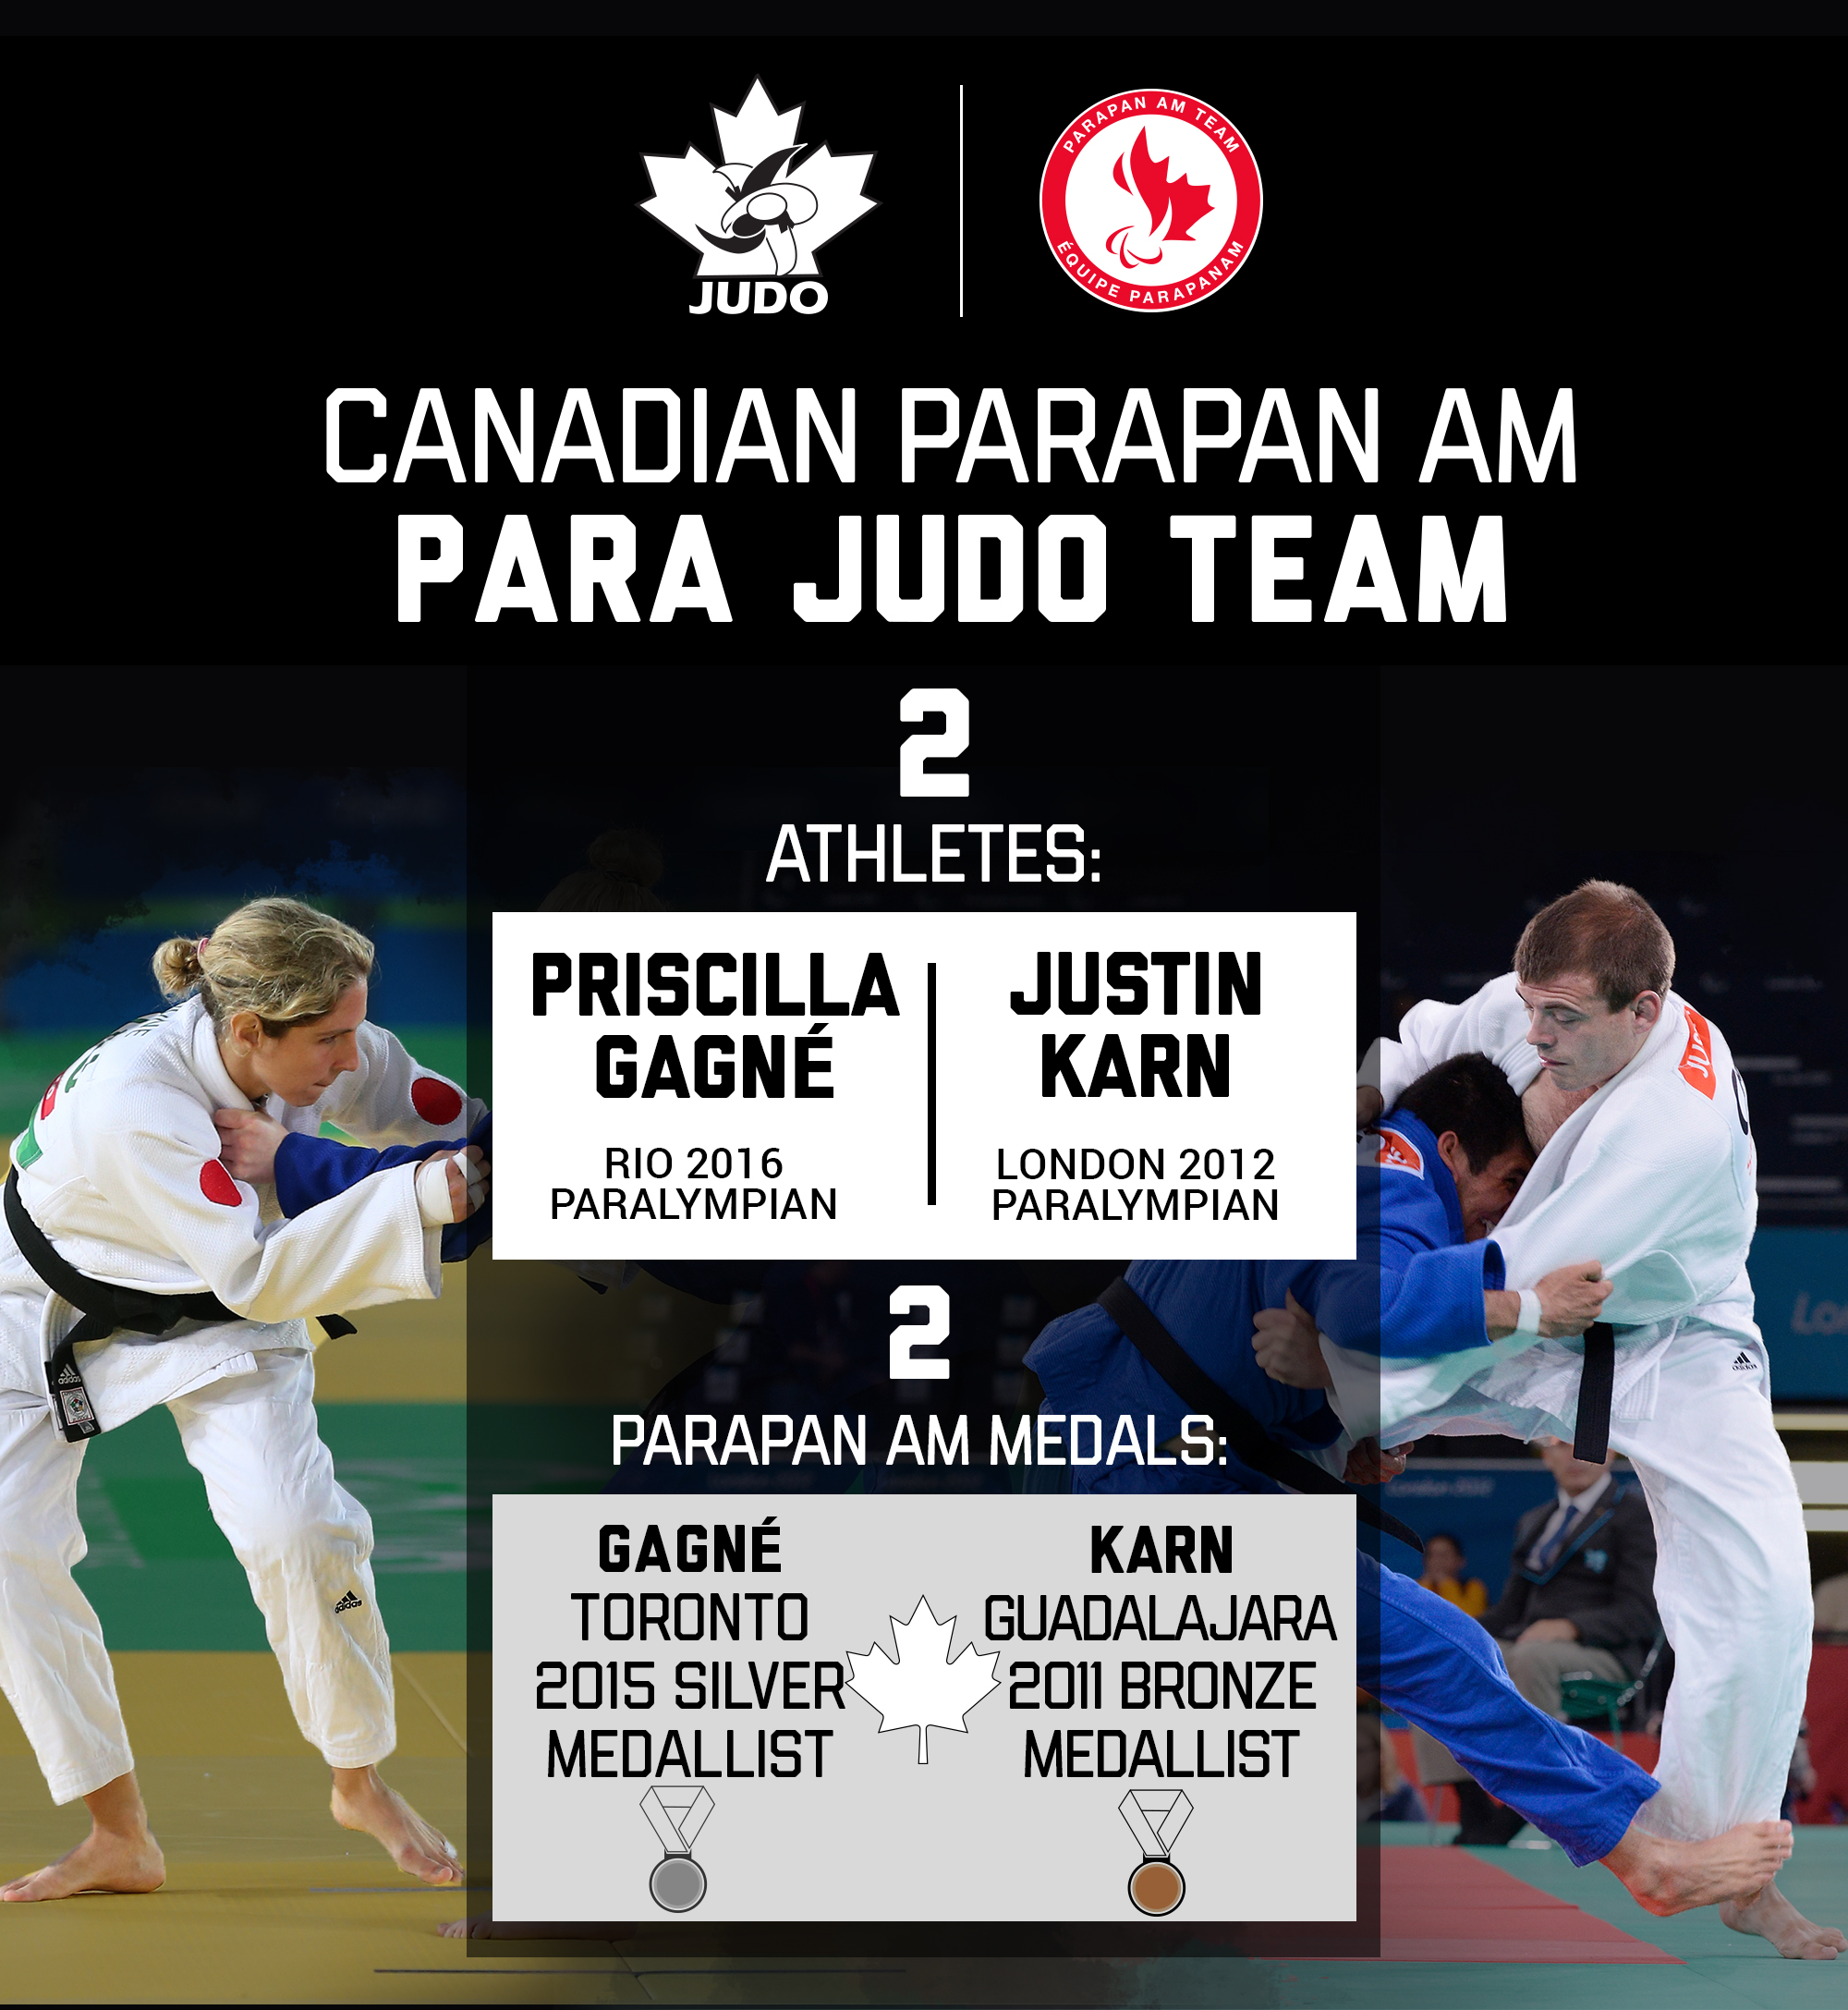 A graphic showing the make-up of the Canadian Parapan Am Judo Team. 